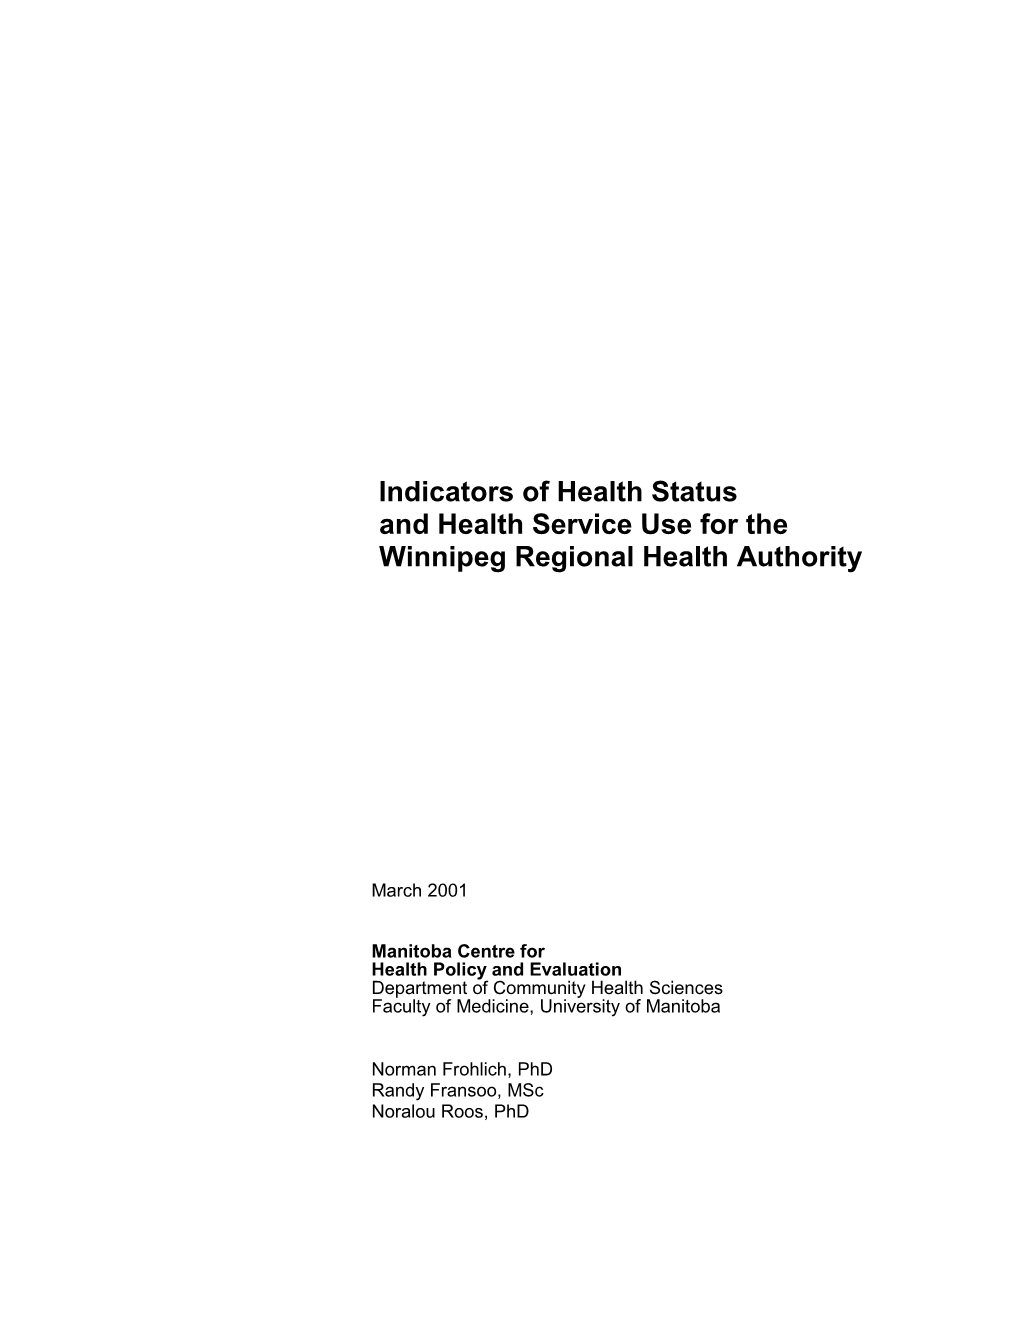 Indicators of Health Status and Health Service Use for the Winnipeg Regional Health Authority